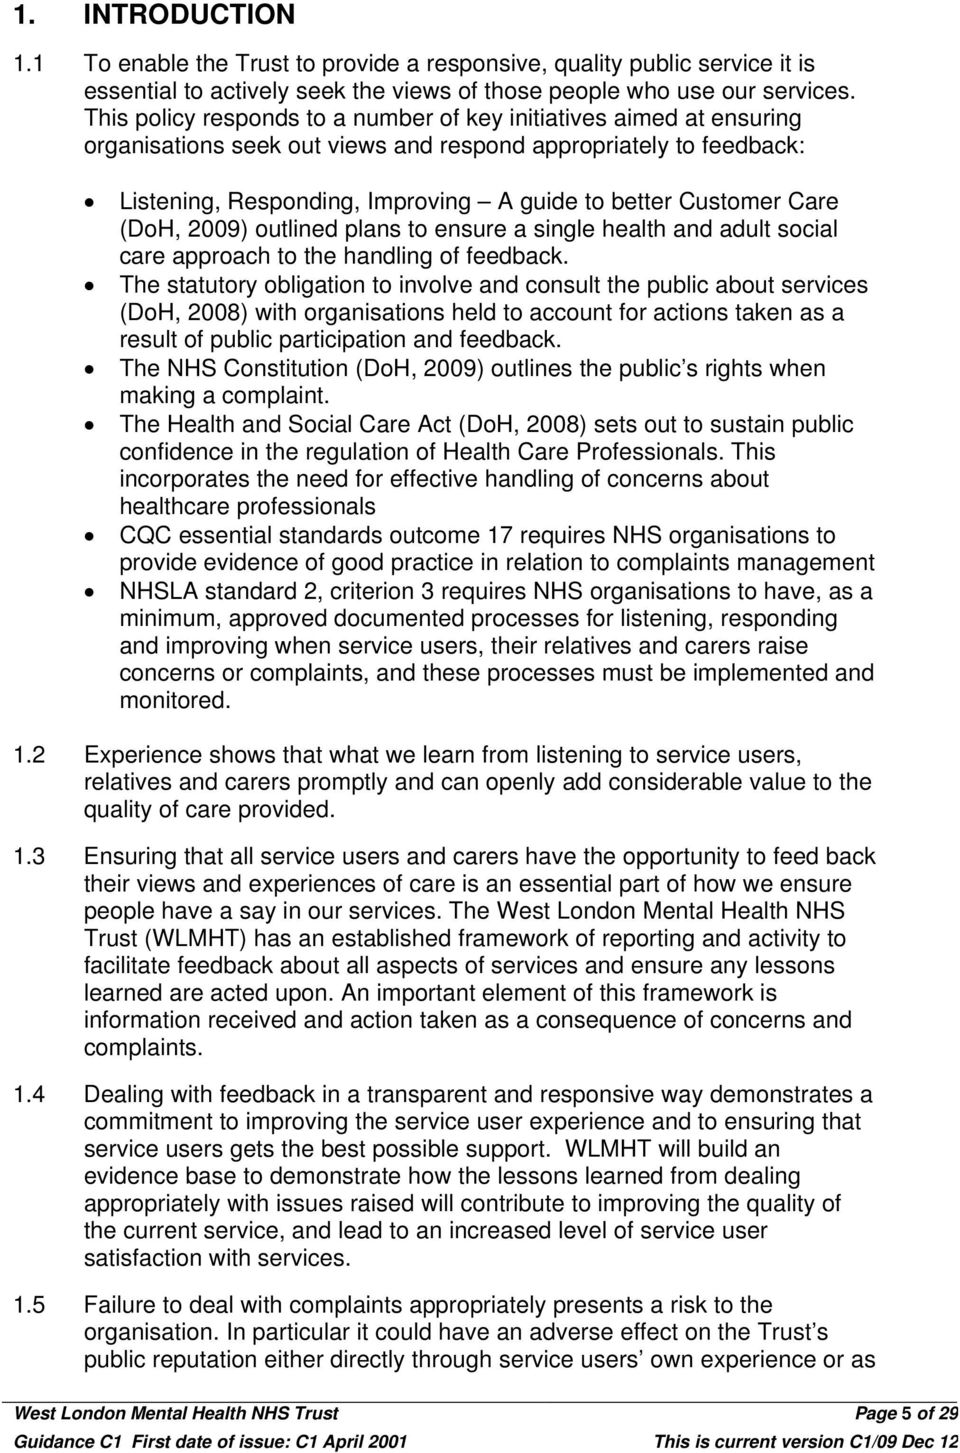 Care (DoH, 2009) outlined plans to ensure a single health and adult social care approach to the handling of feedback.